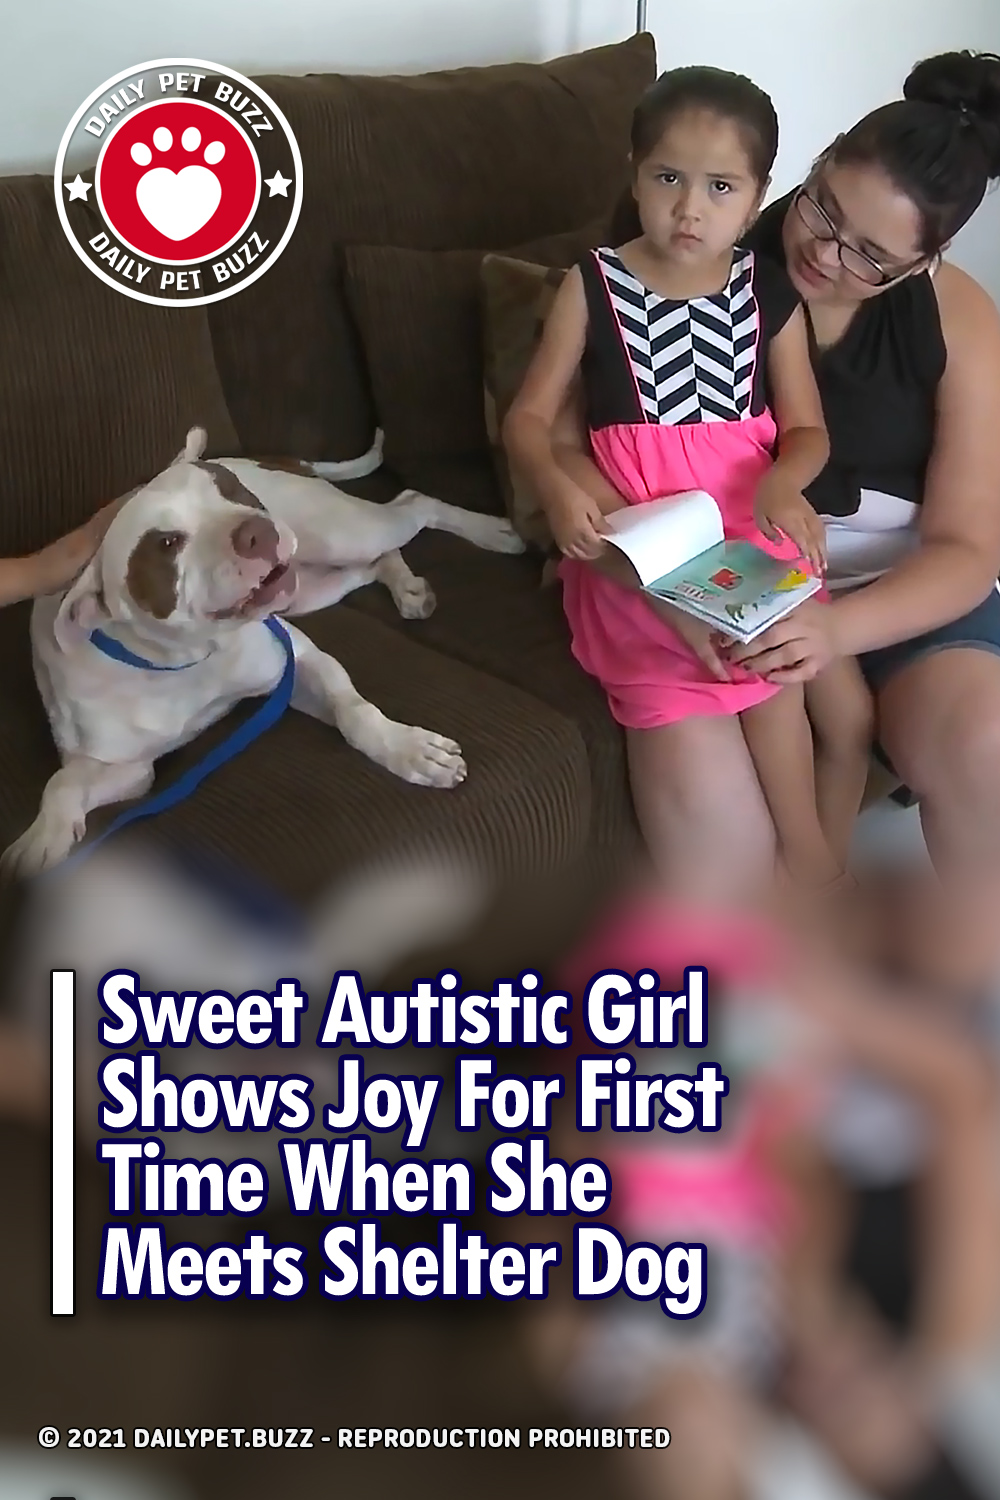 Sweet Autistic Girl Shows Joy For First Time When She Meets Shelter Dog